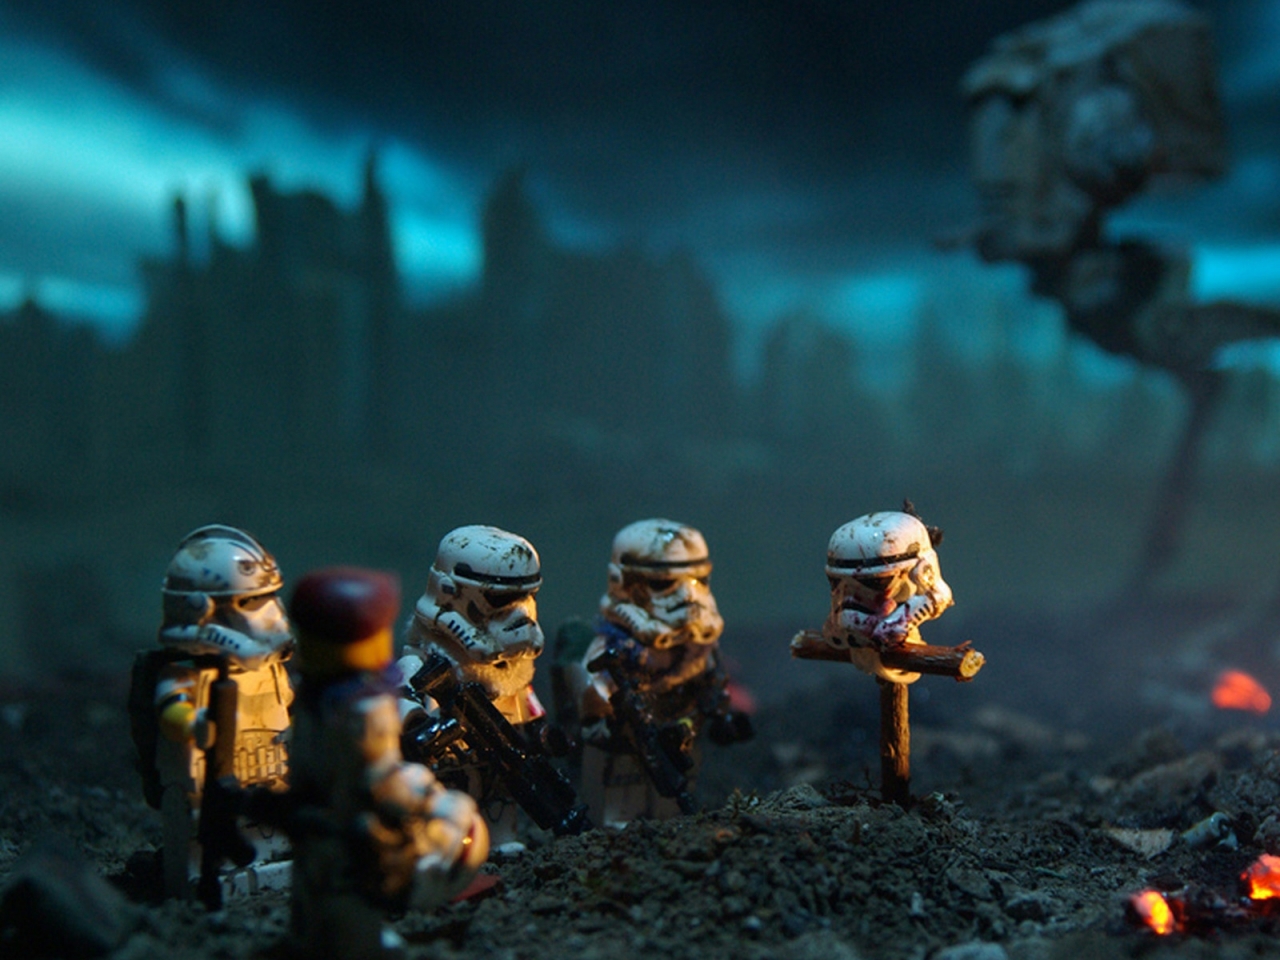 Star Wars Lego Soldiers for 1280 x 960 resolution